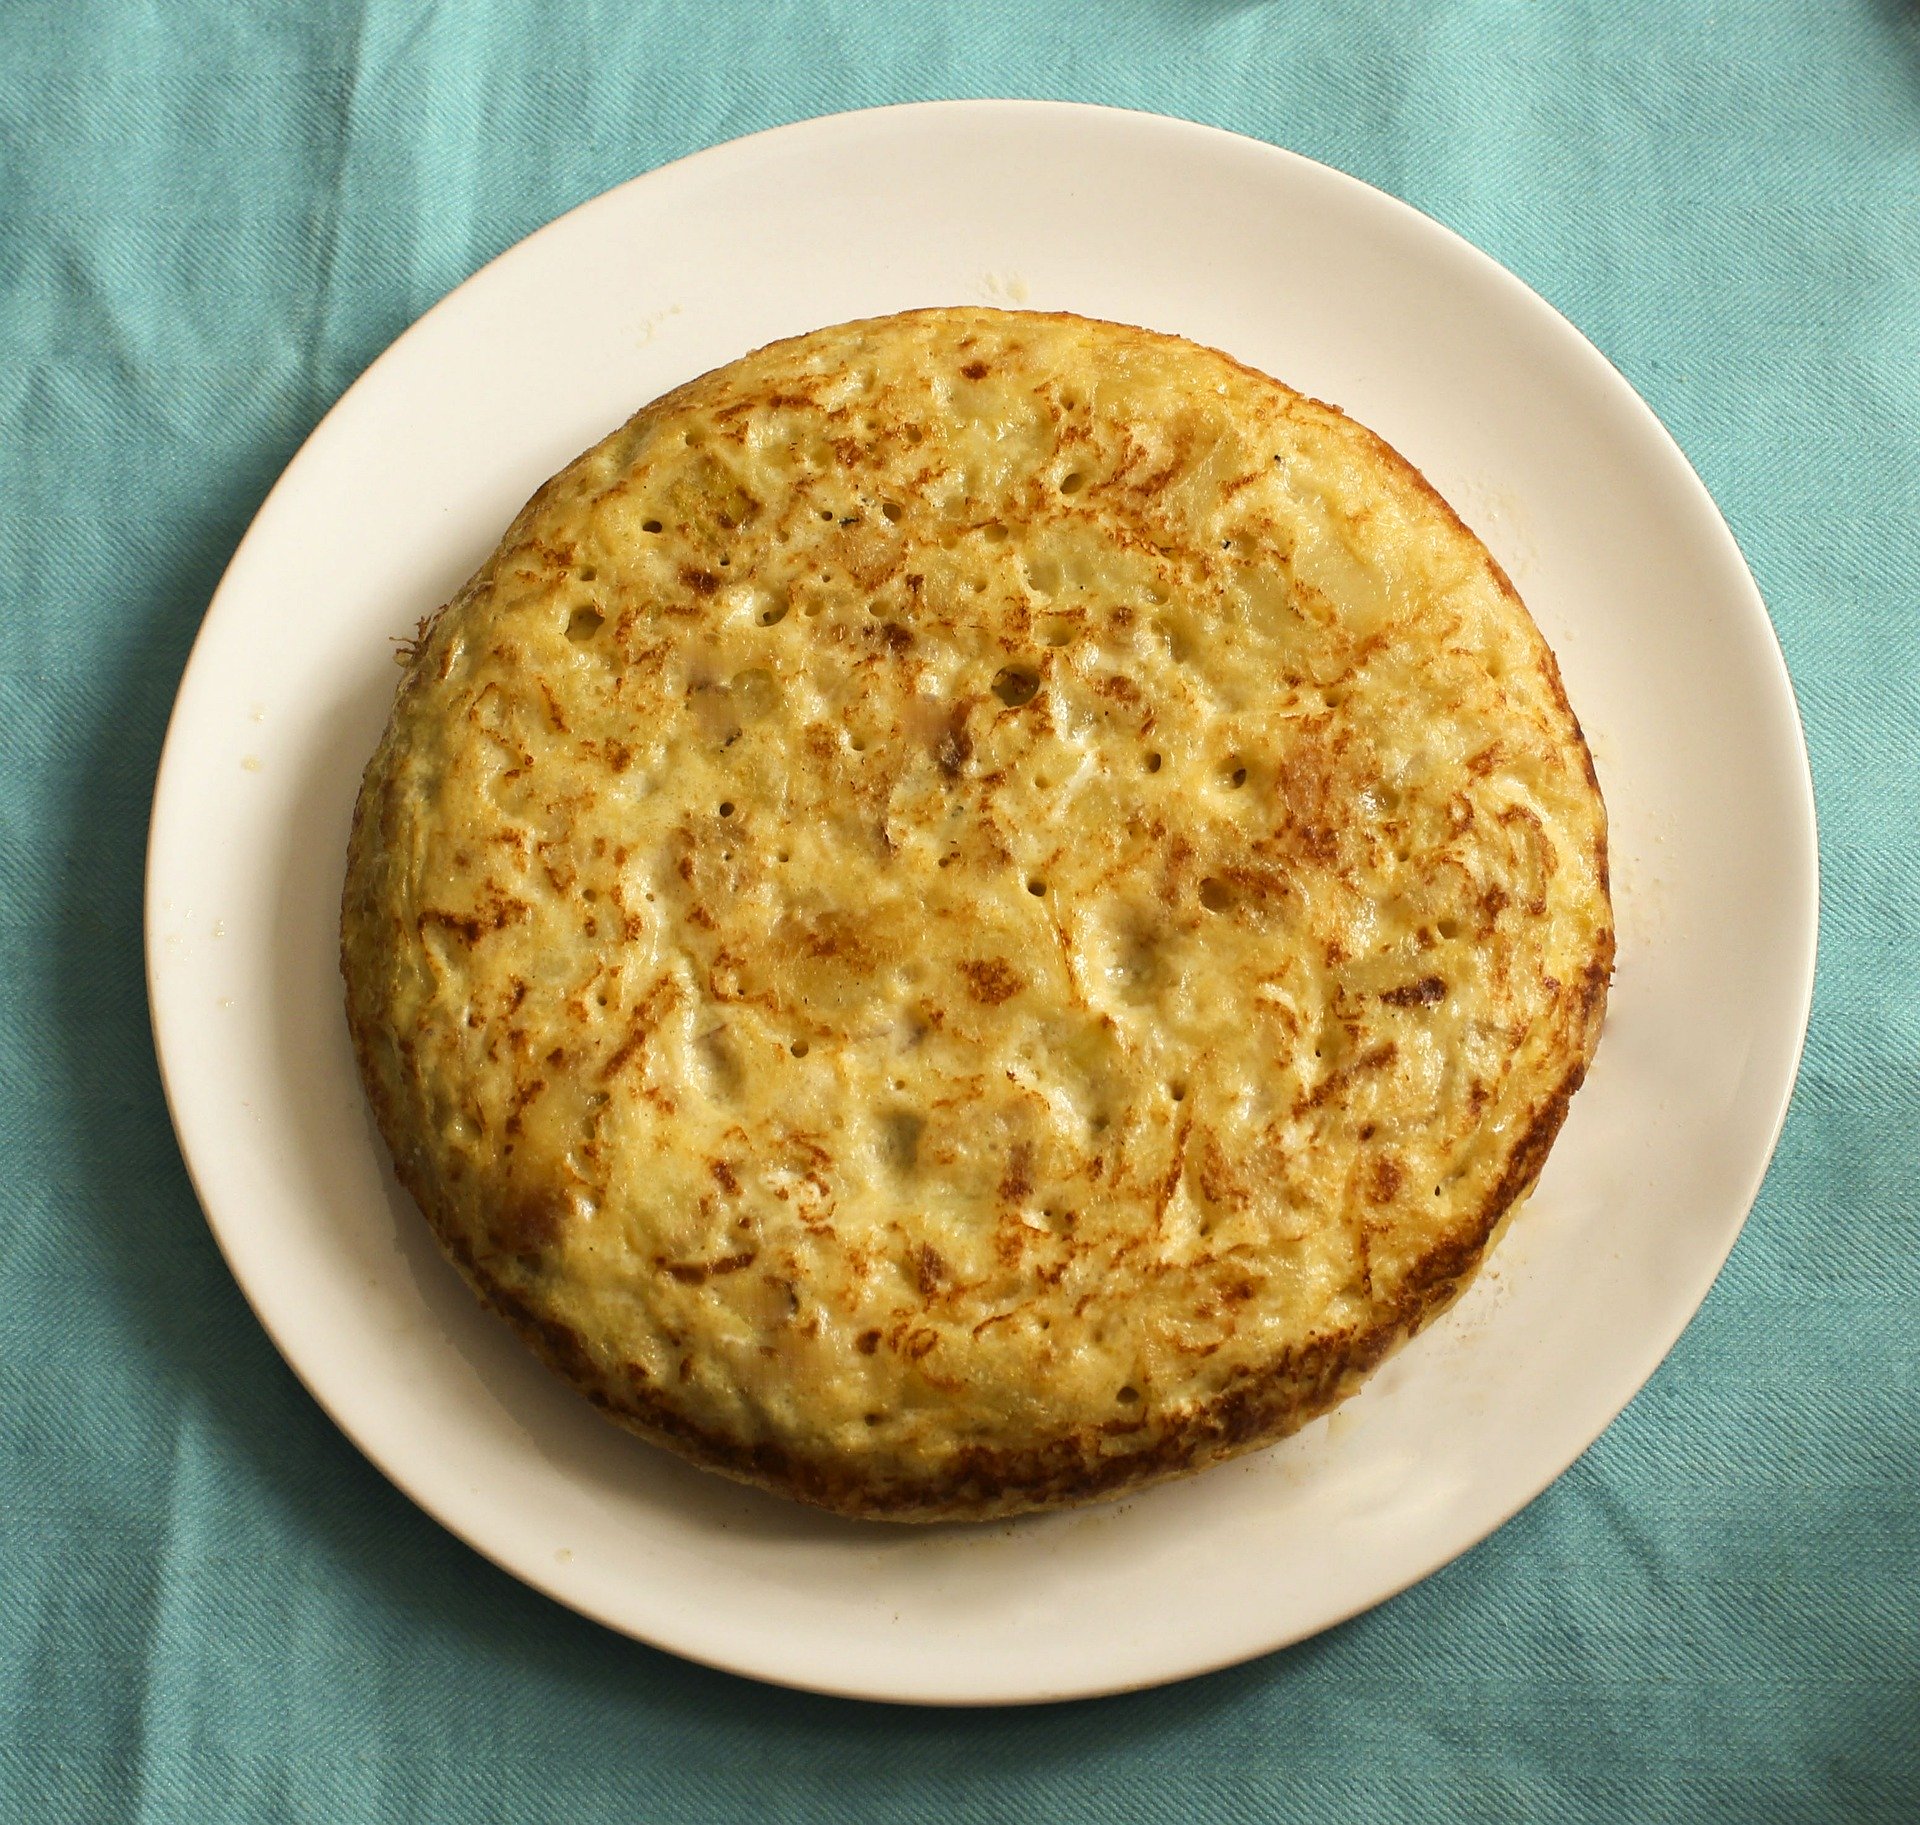 A cooked potato tortilla served on a plate